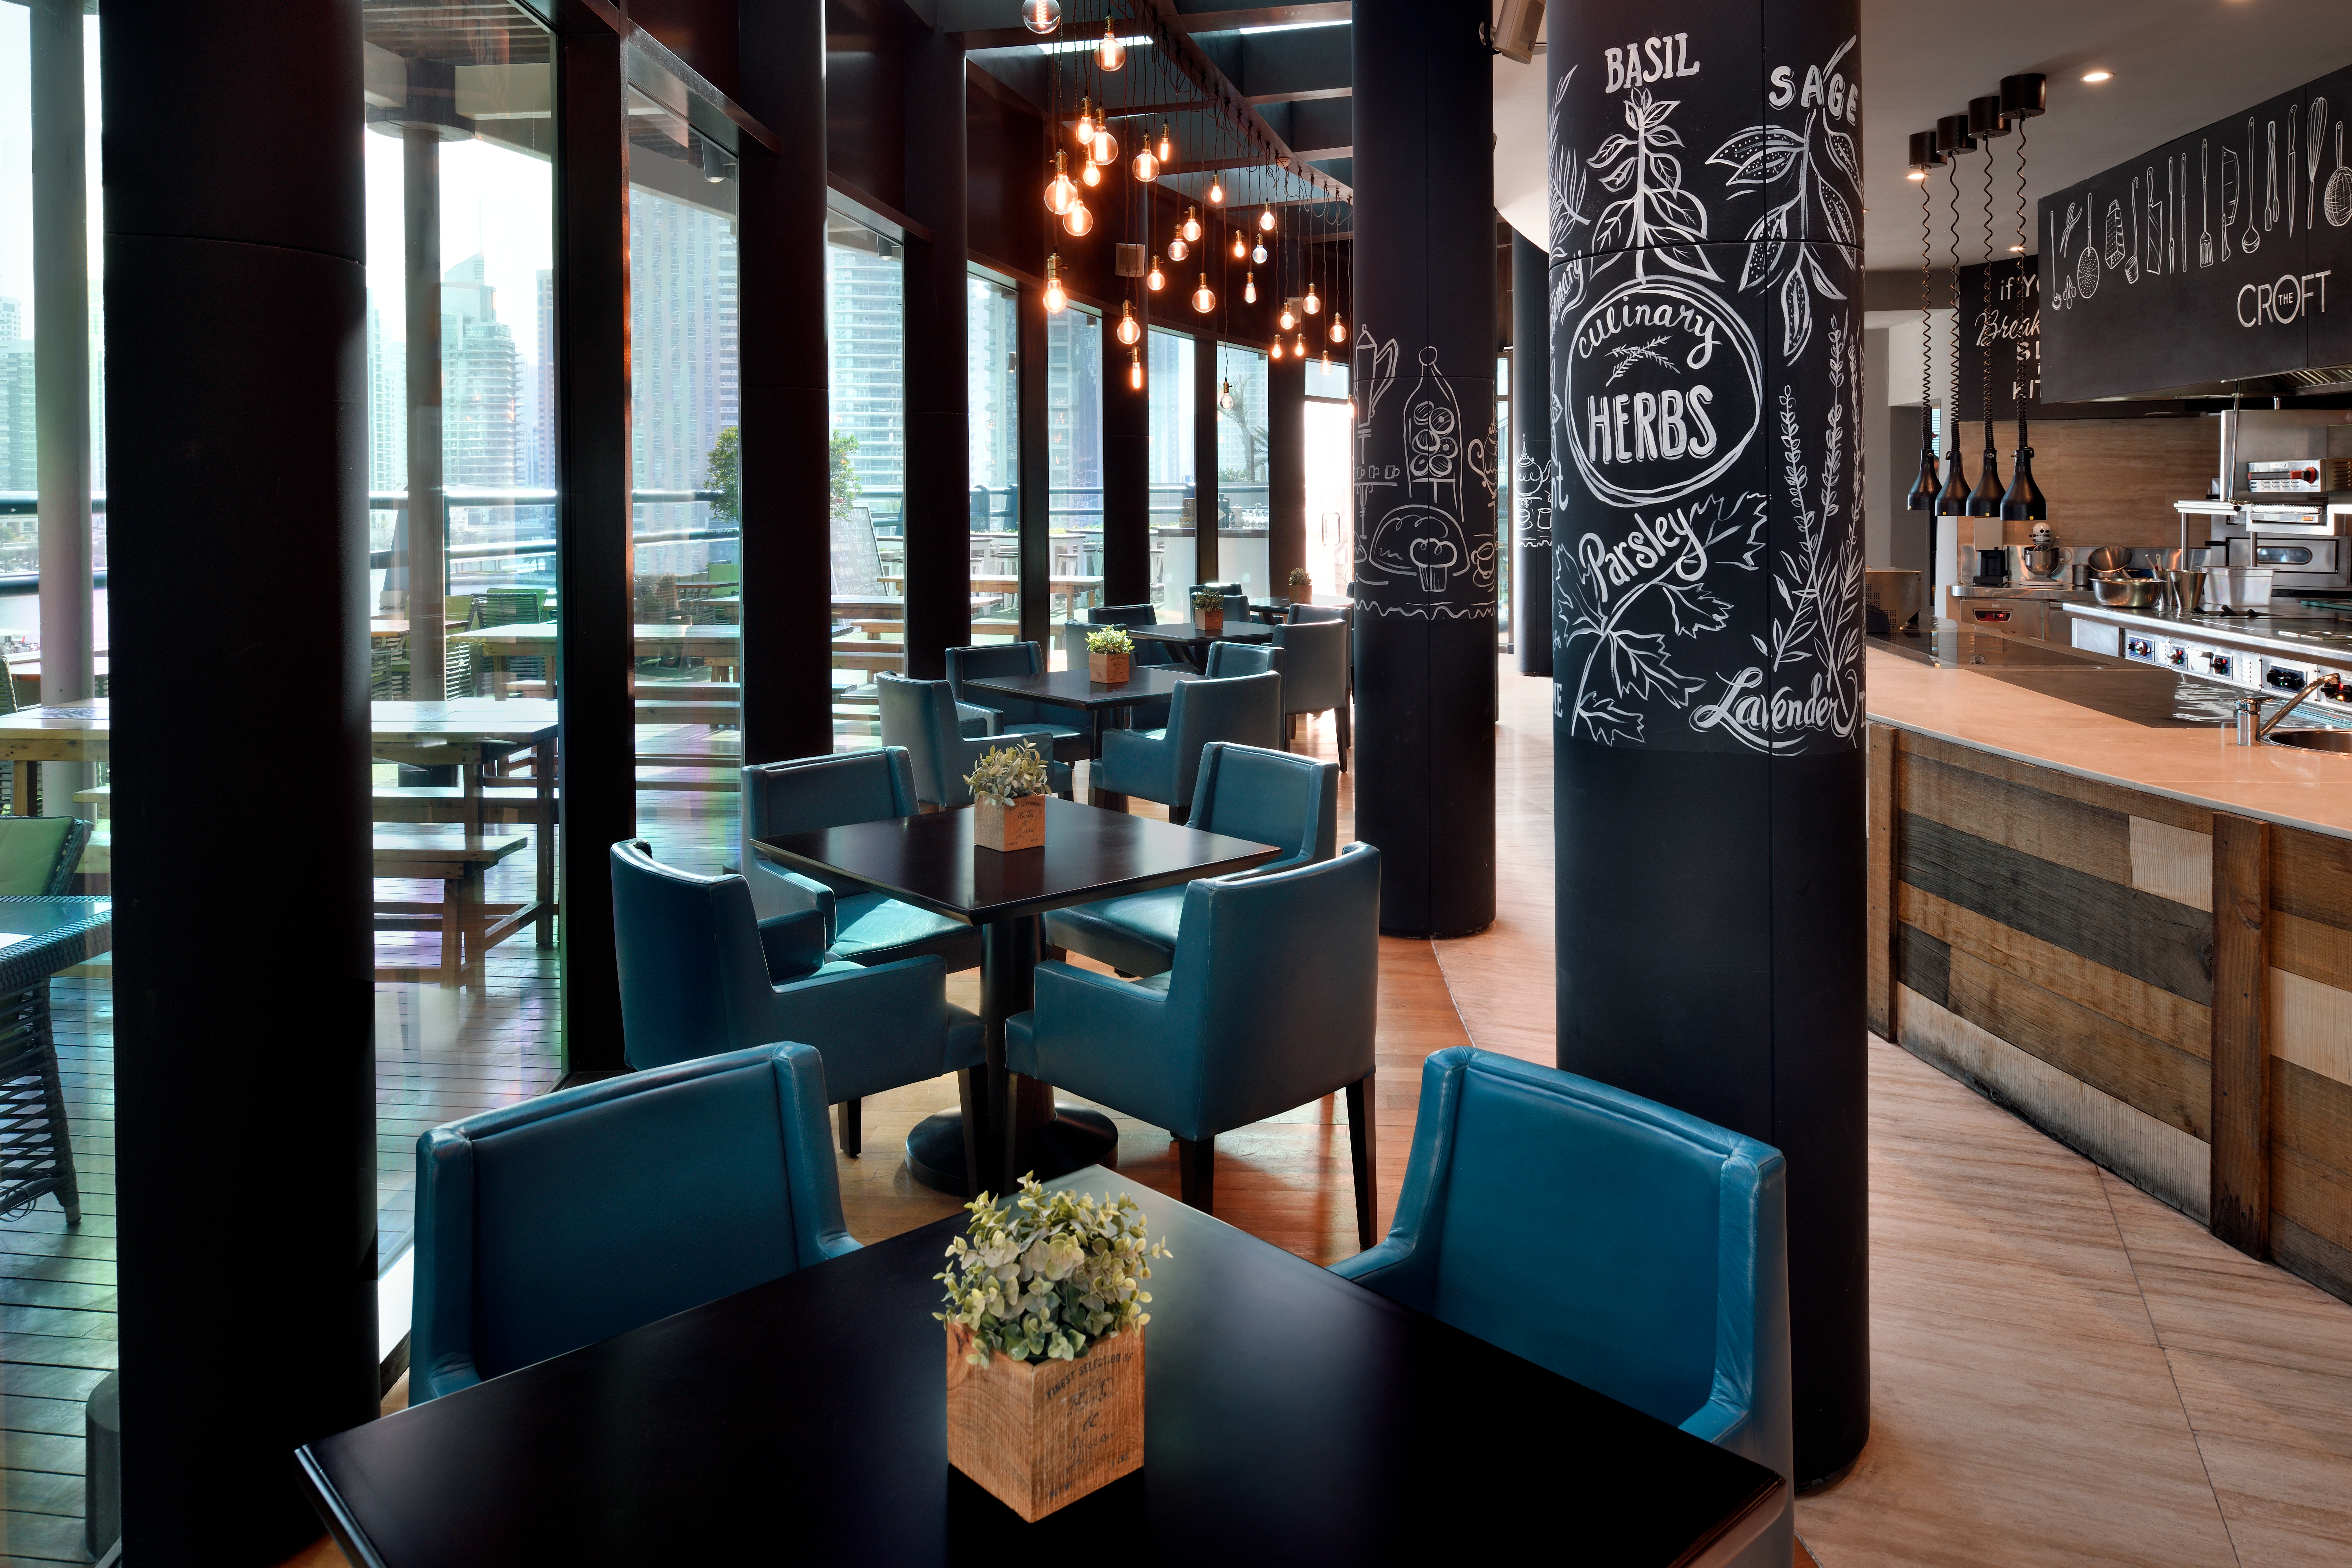 Blue chairs with chalkboard pillars and restaurant bar